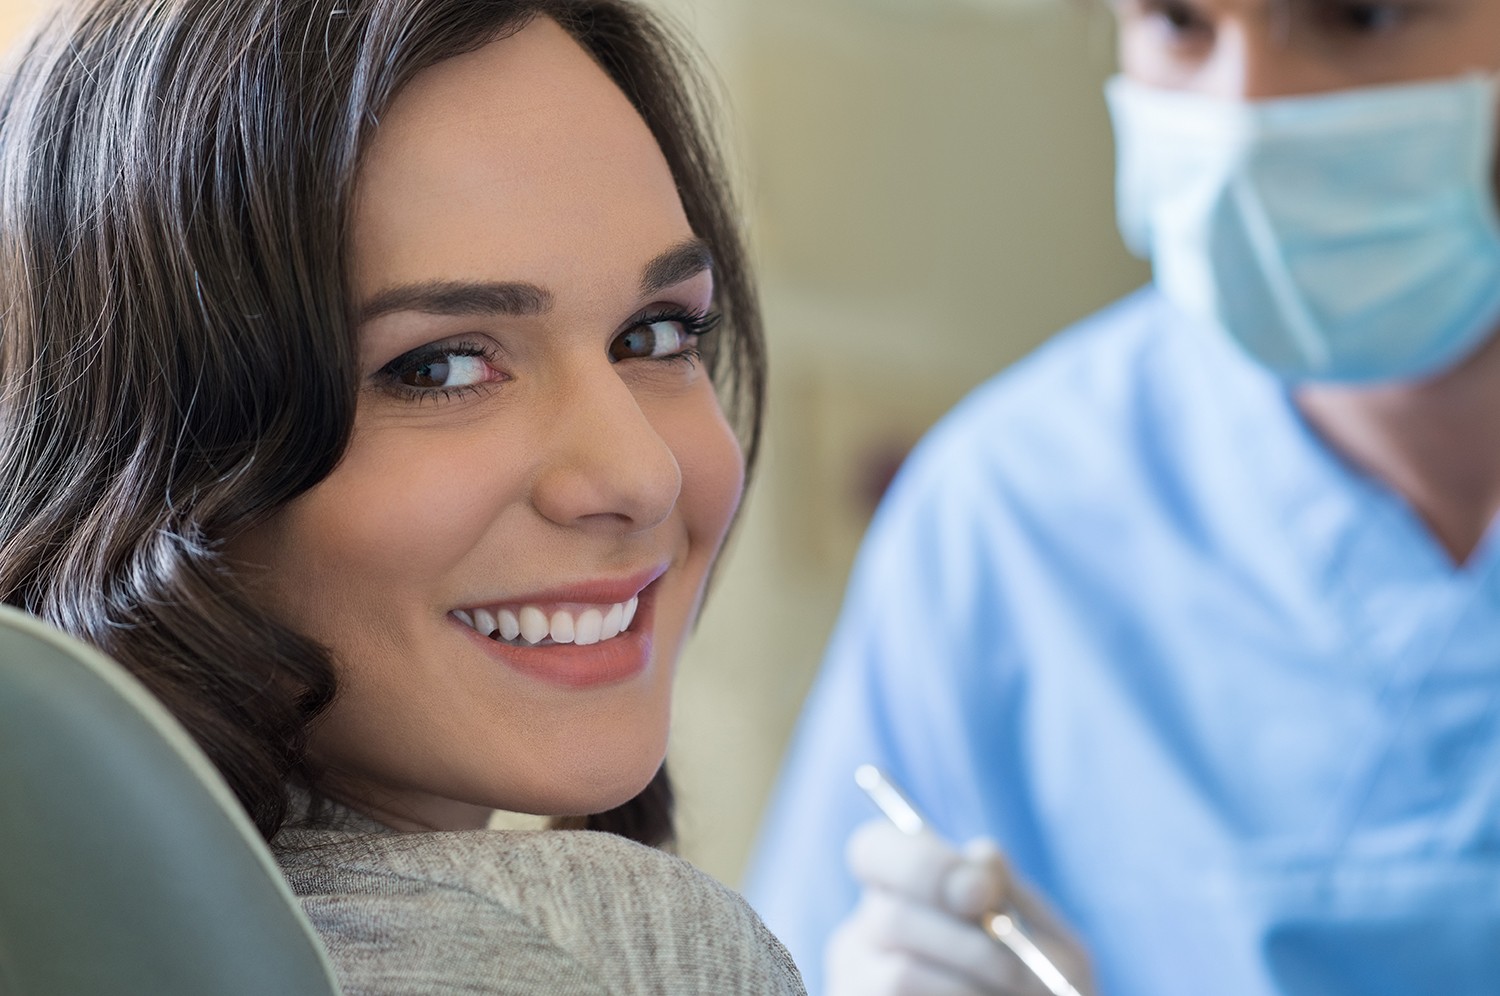 What can Dental Cleaning do for you?